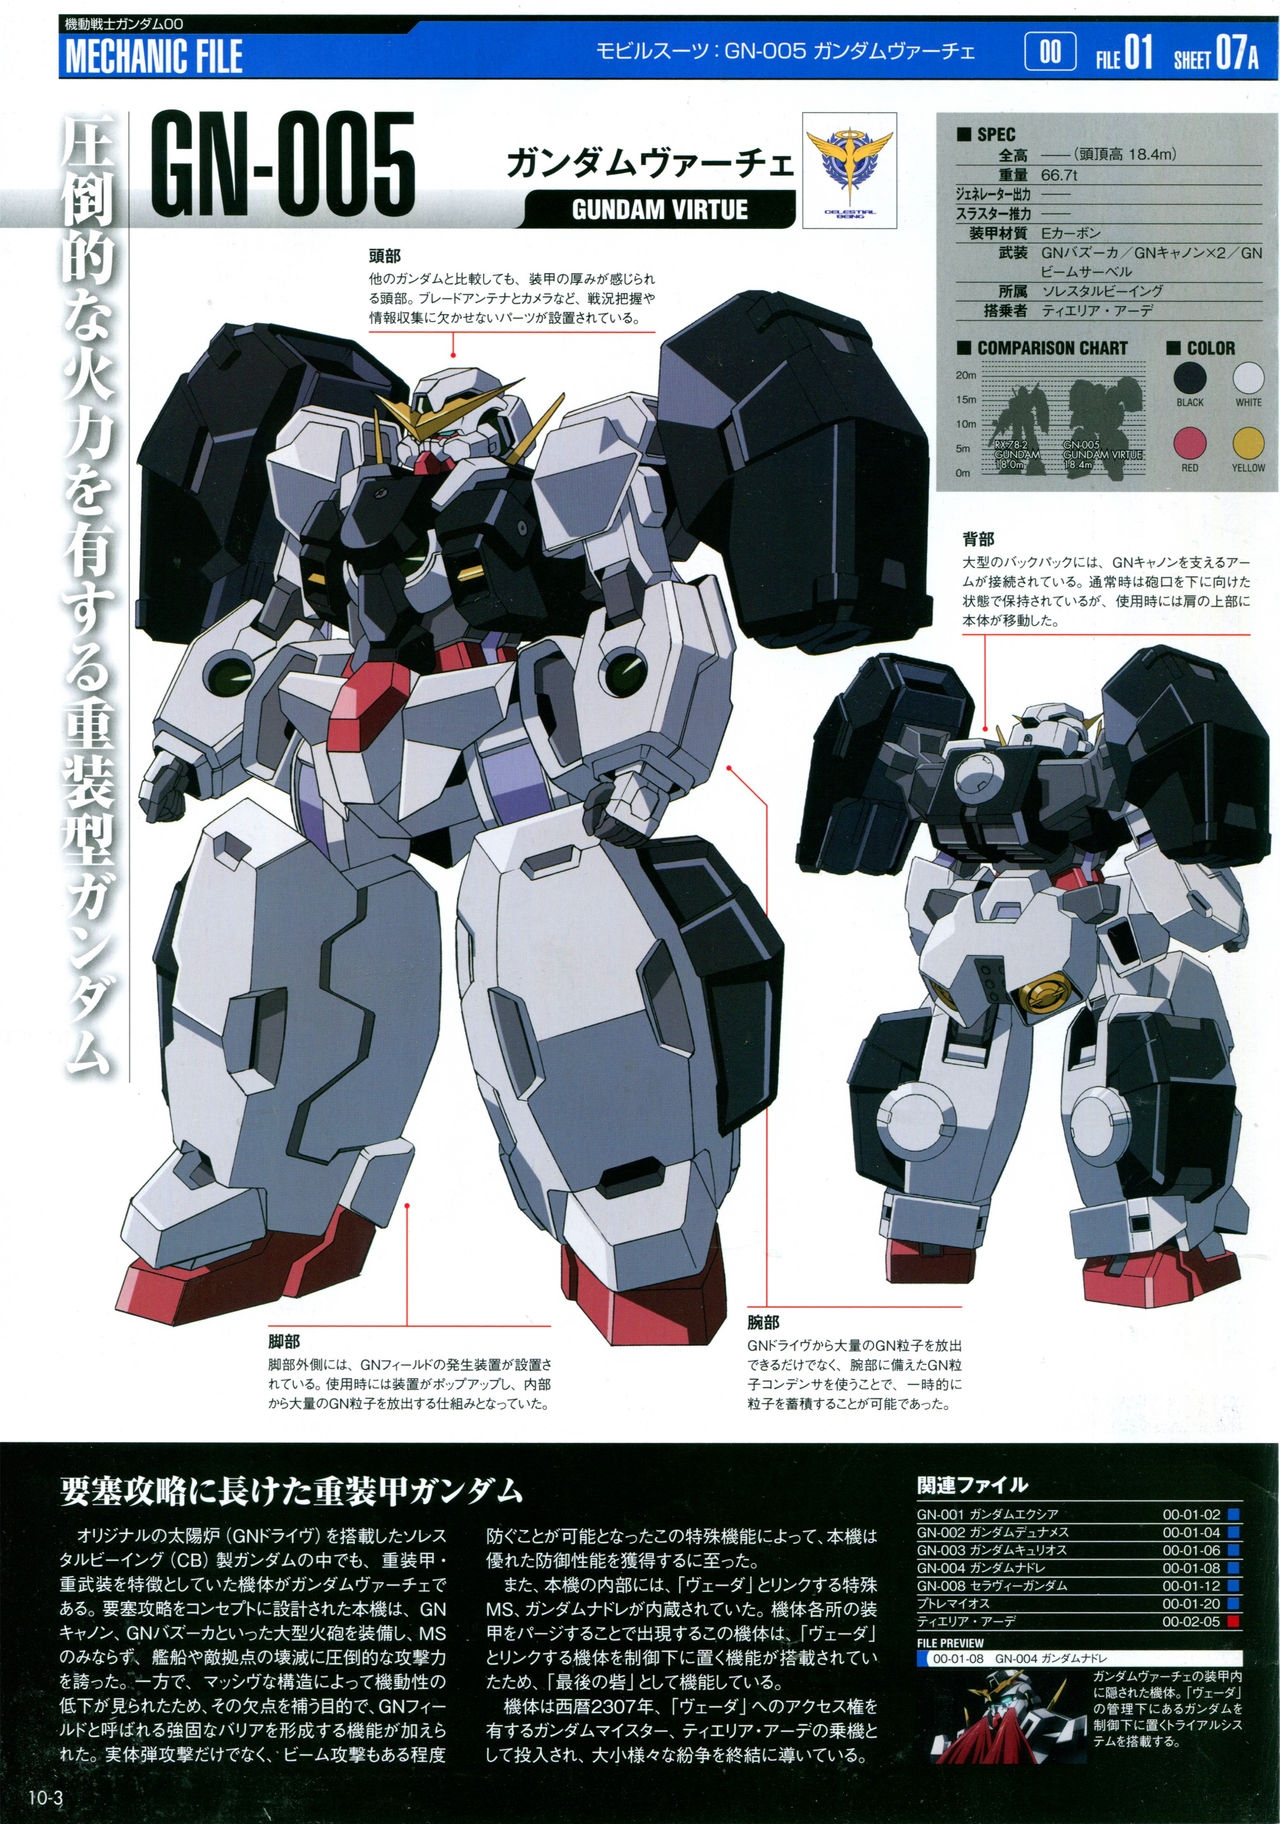 The Official Gundam Perfect File - No. 010 4